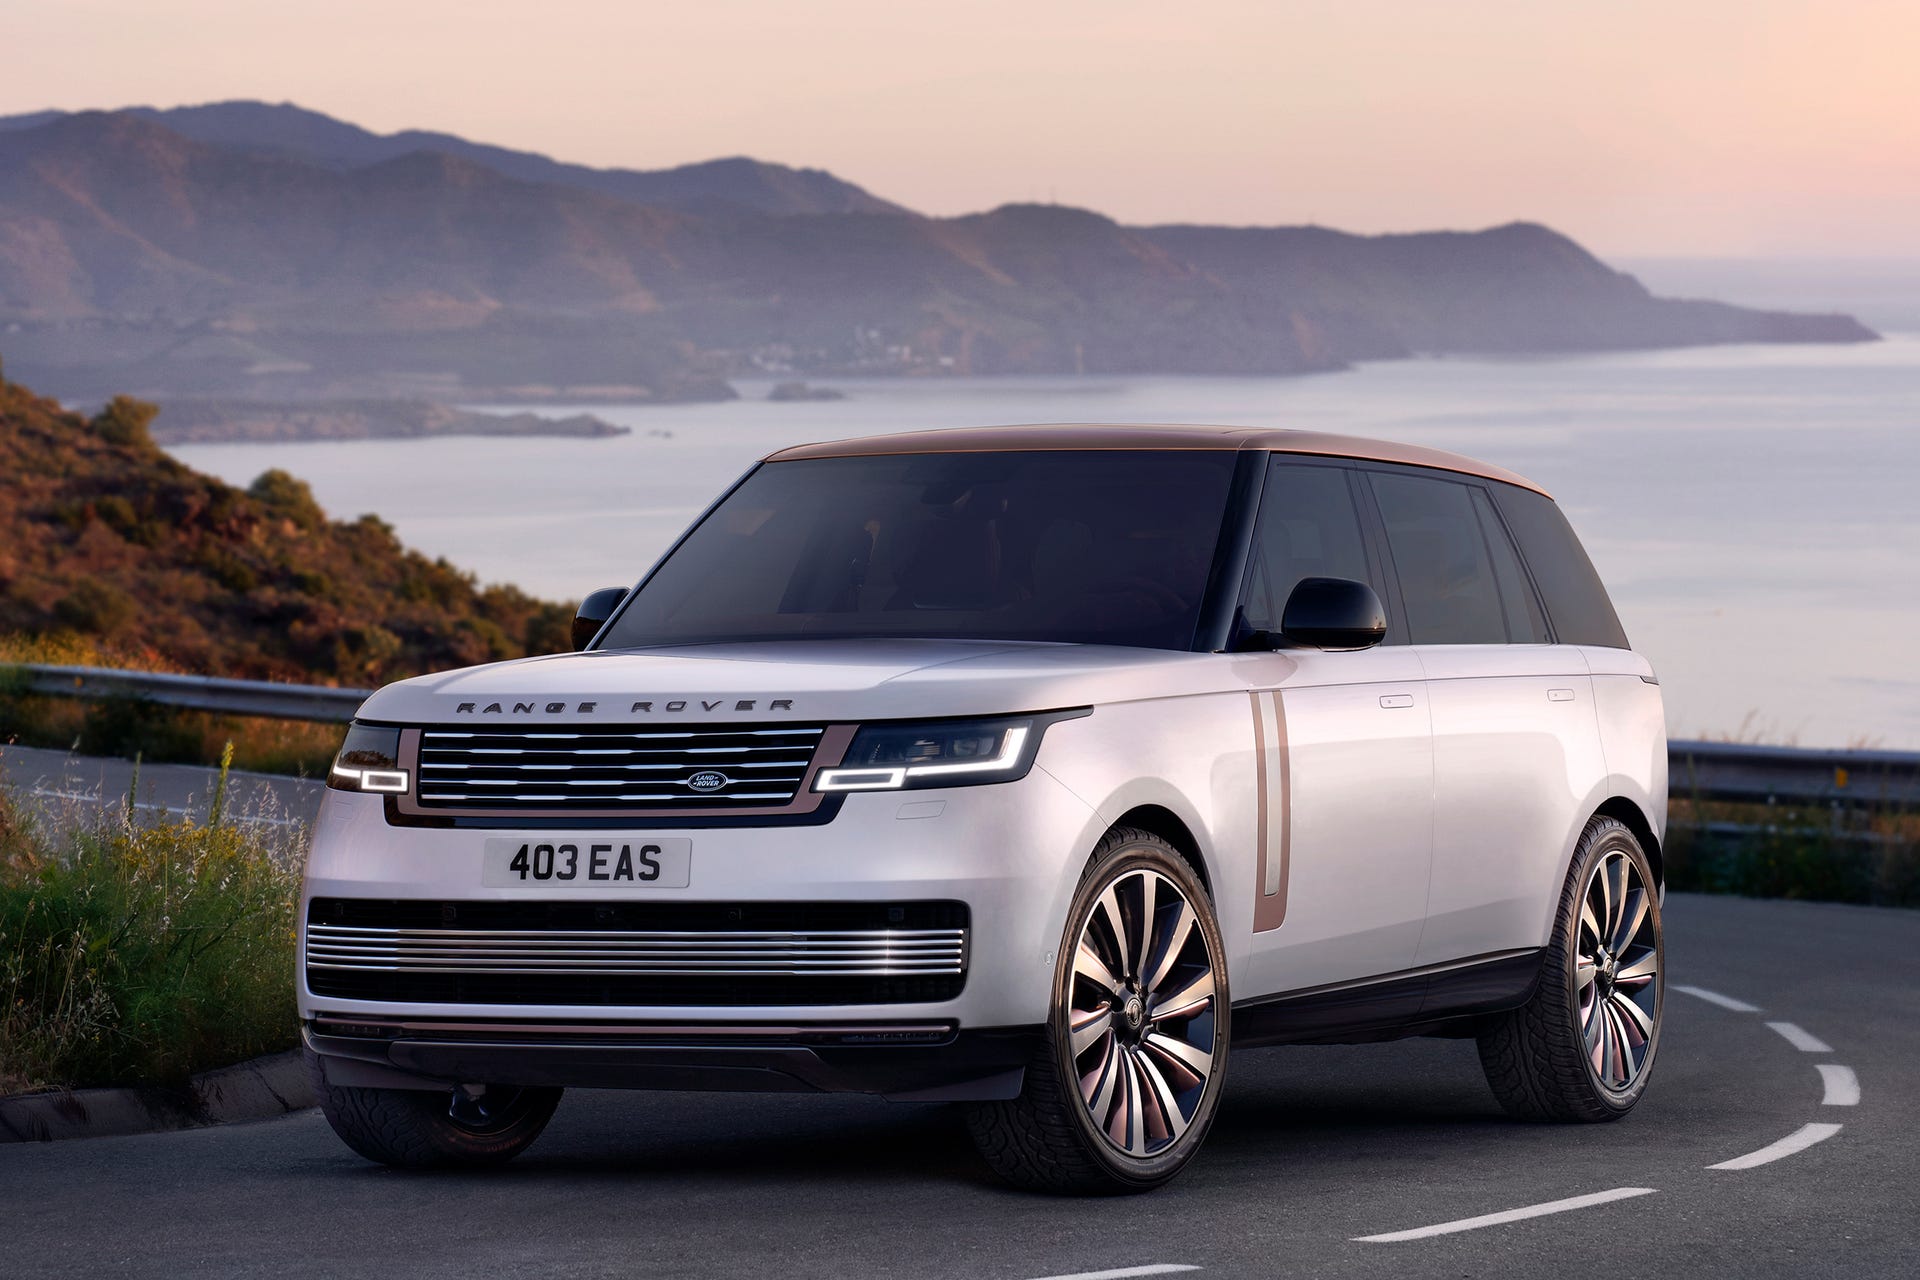 The new Range Rover SV is the future of subtle luxury - CNET